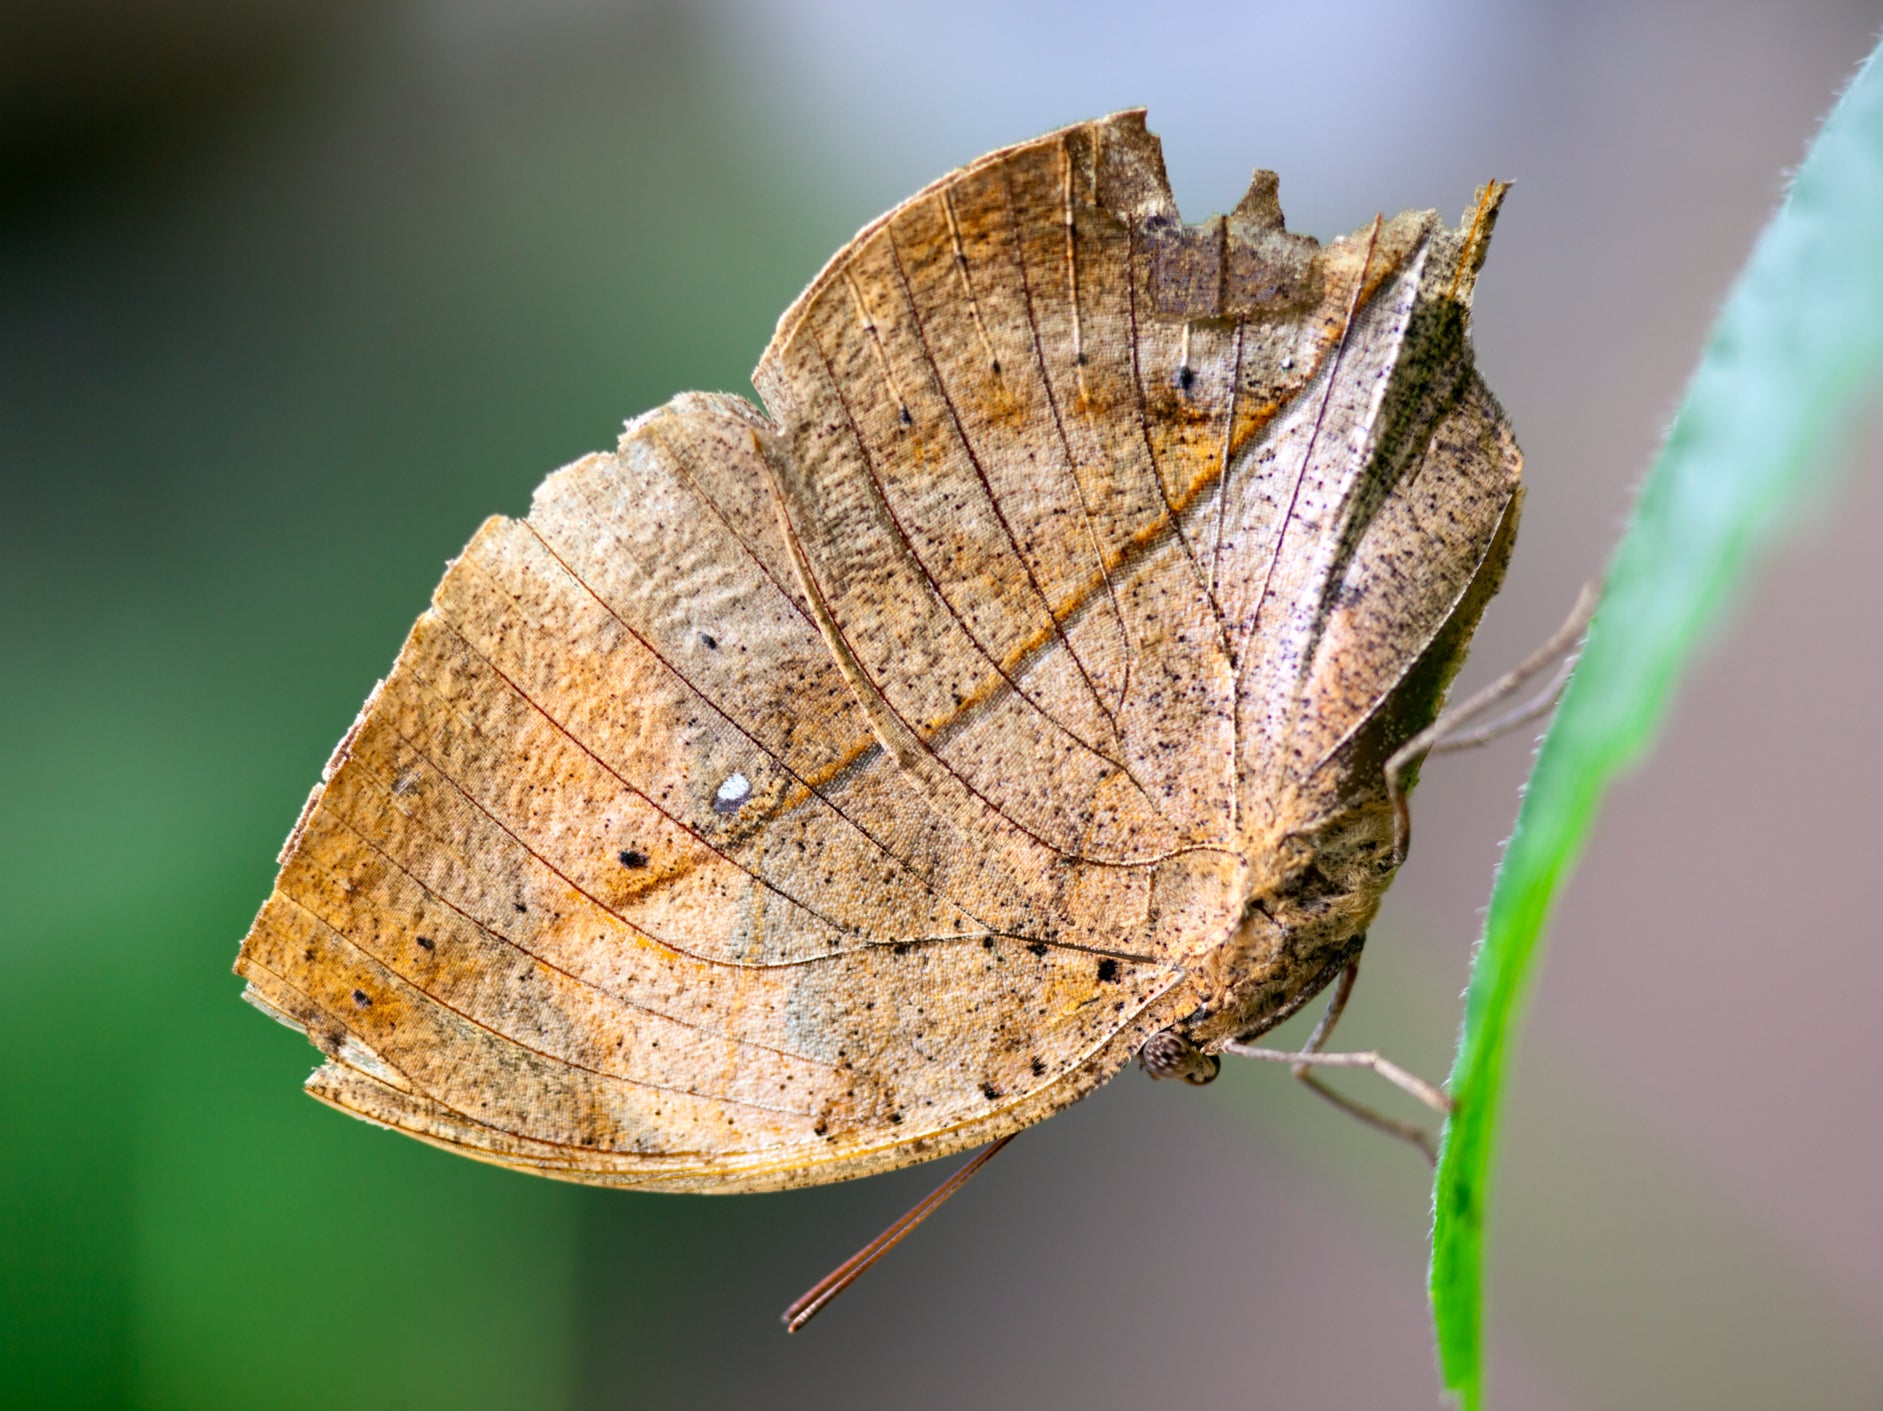 When the blue and yellow-topped wings of Kallima butterflies are folded back, they resemble dead leaves